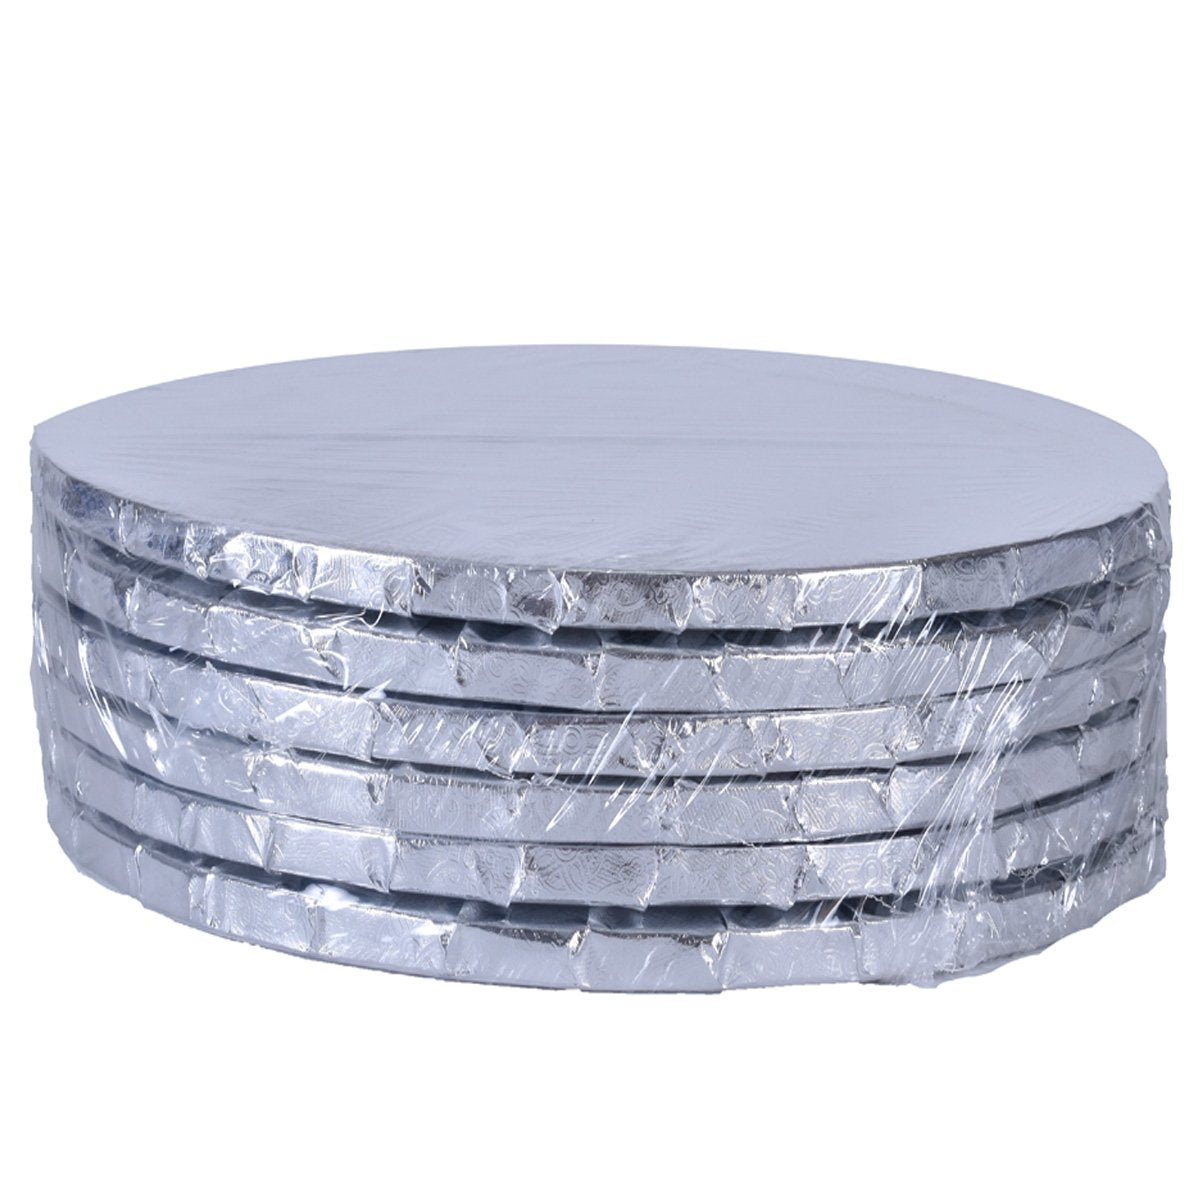 Silver Circle Cake Drums — All Sizes